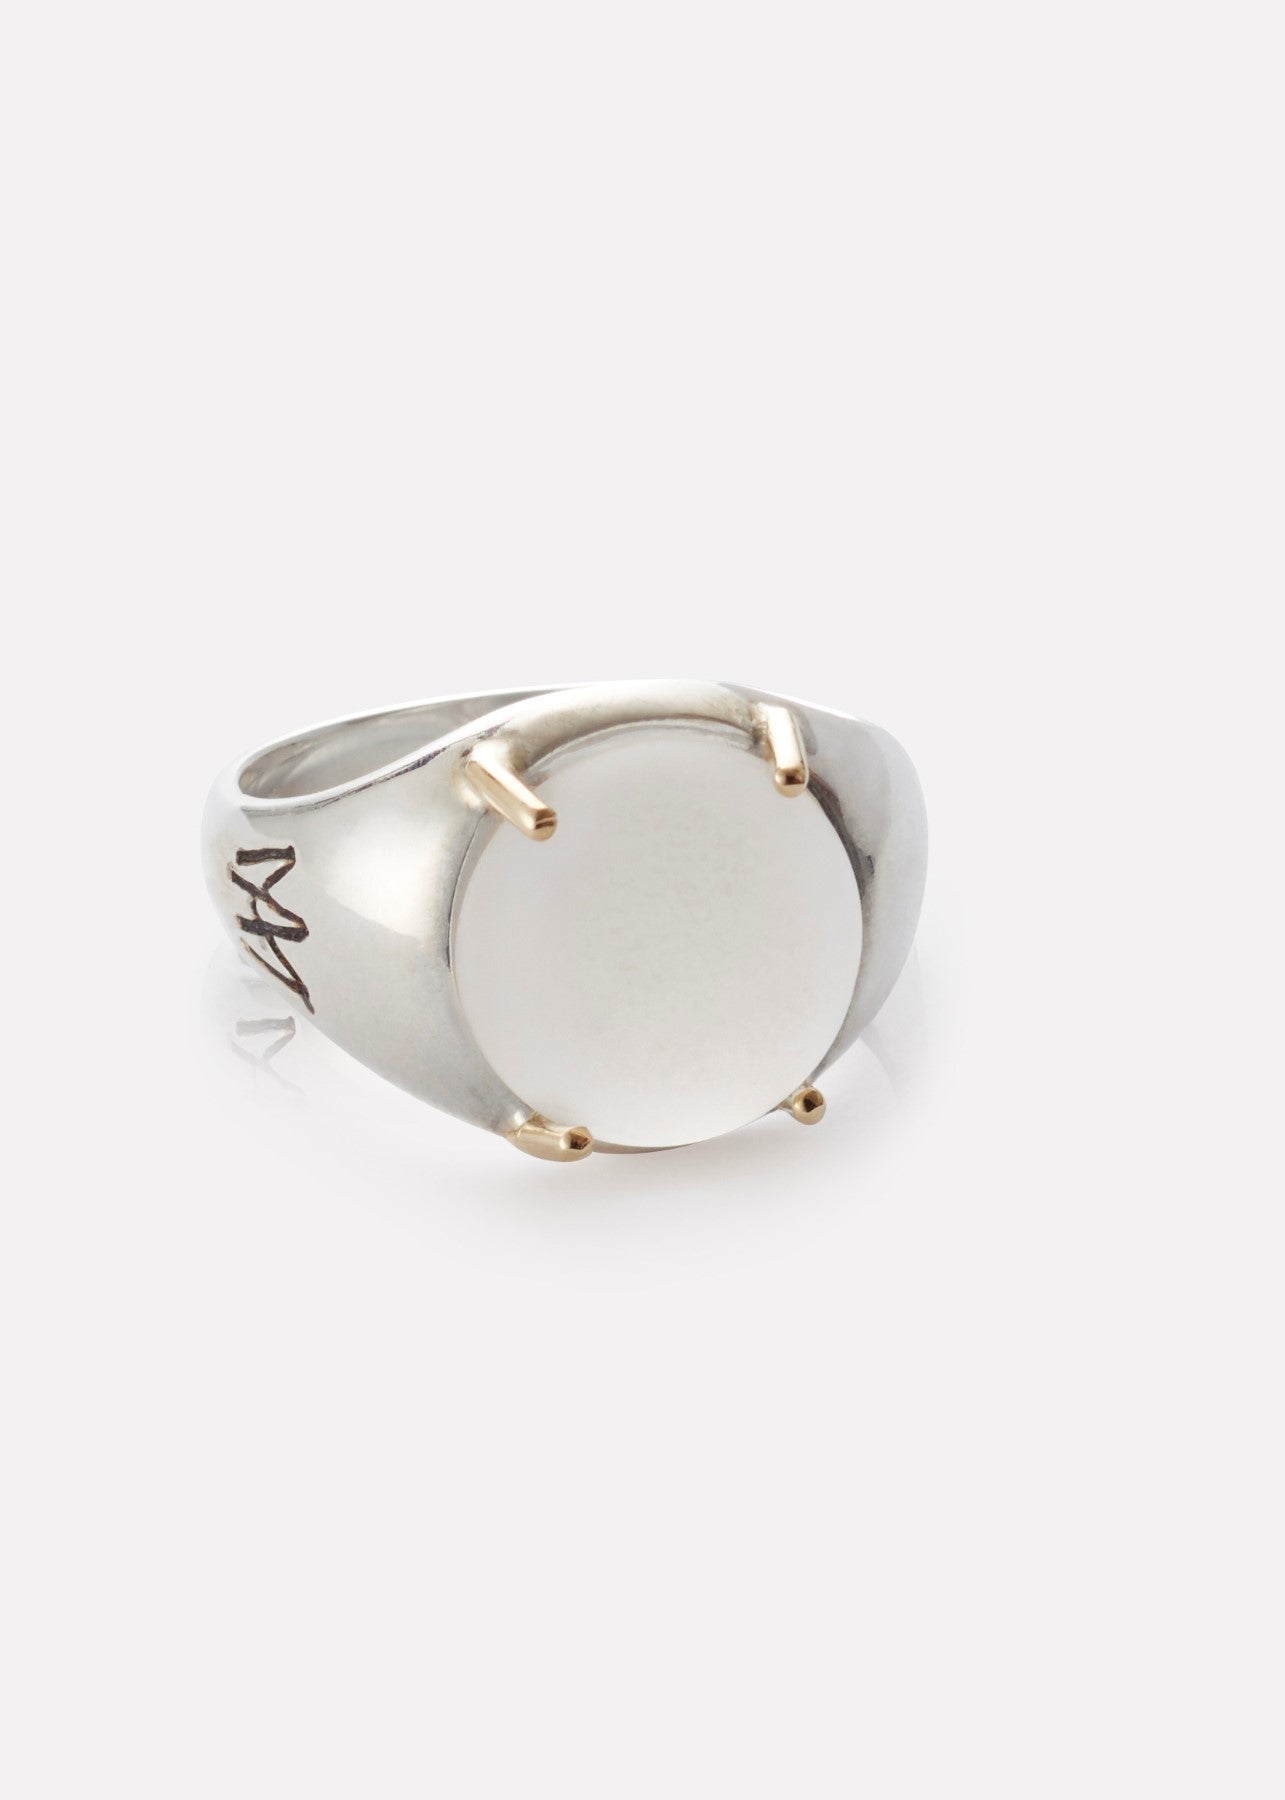 Unisex ring with gold claws and matte moonstone